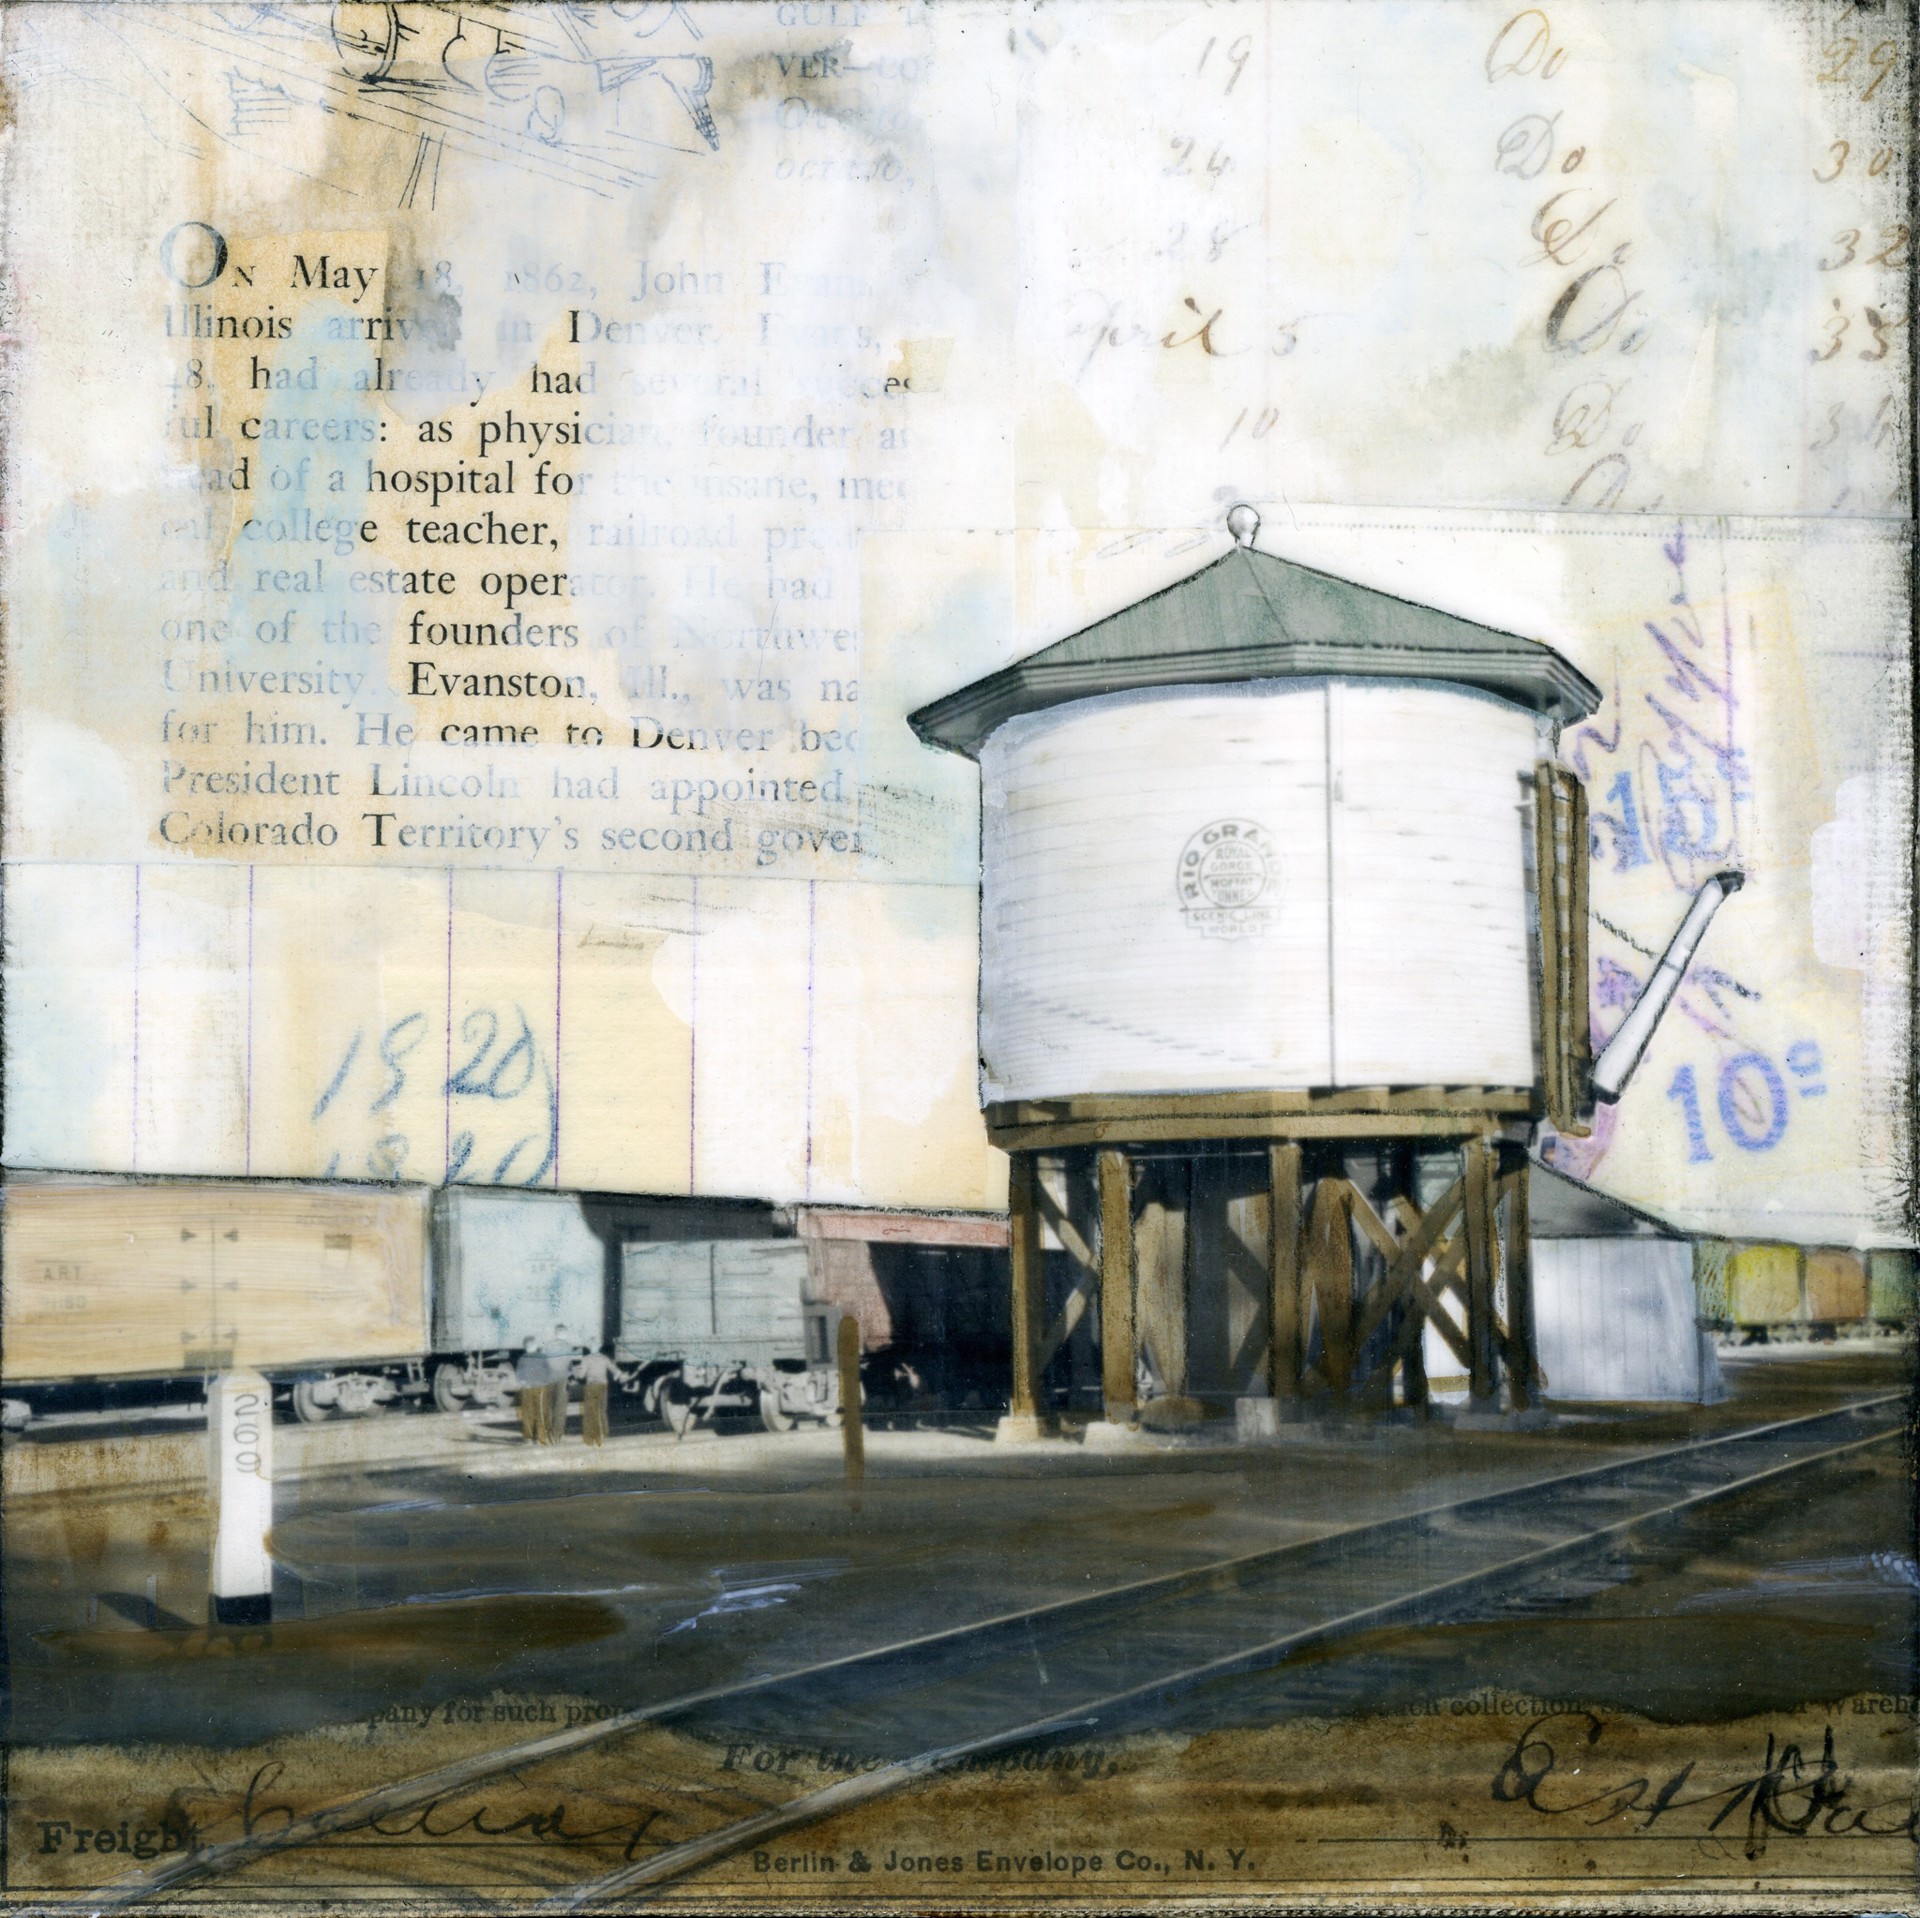 Rail Water Tower by JC Spock